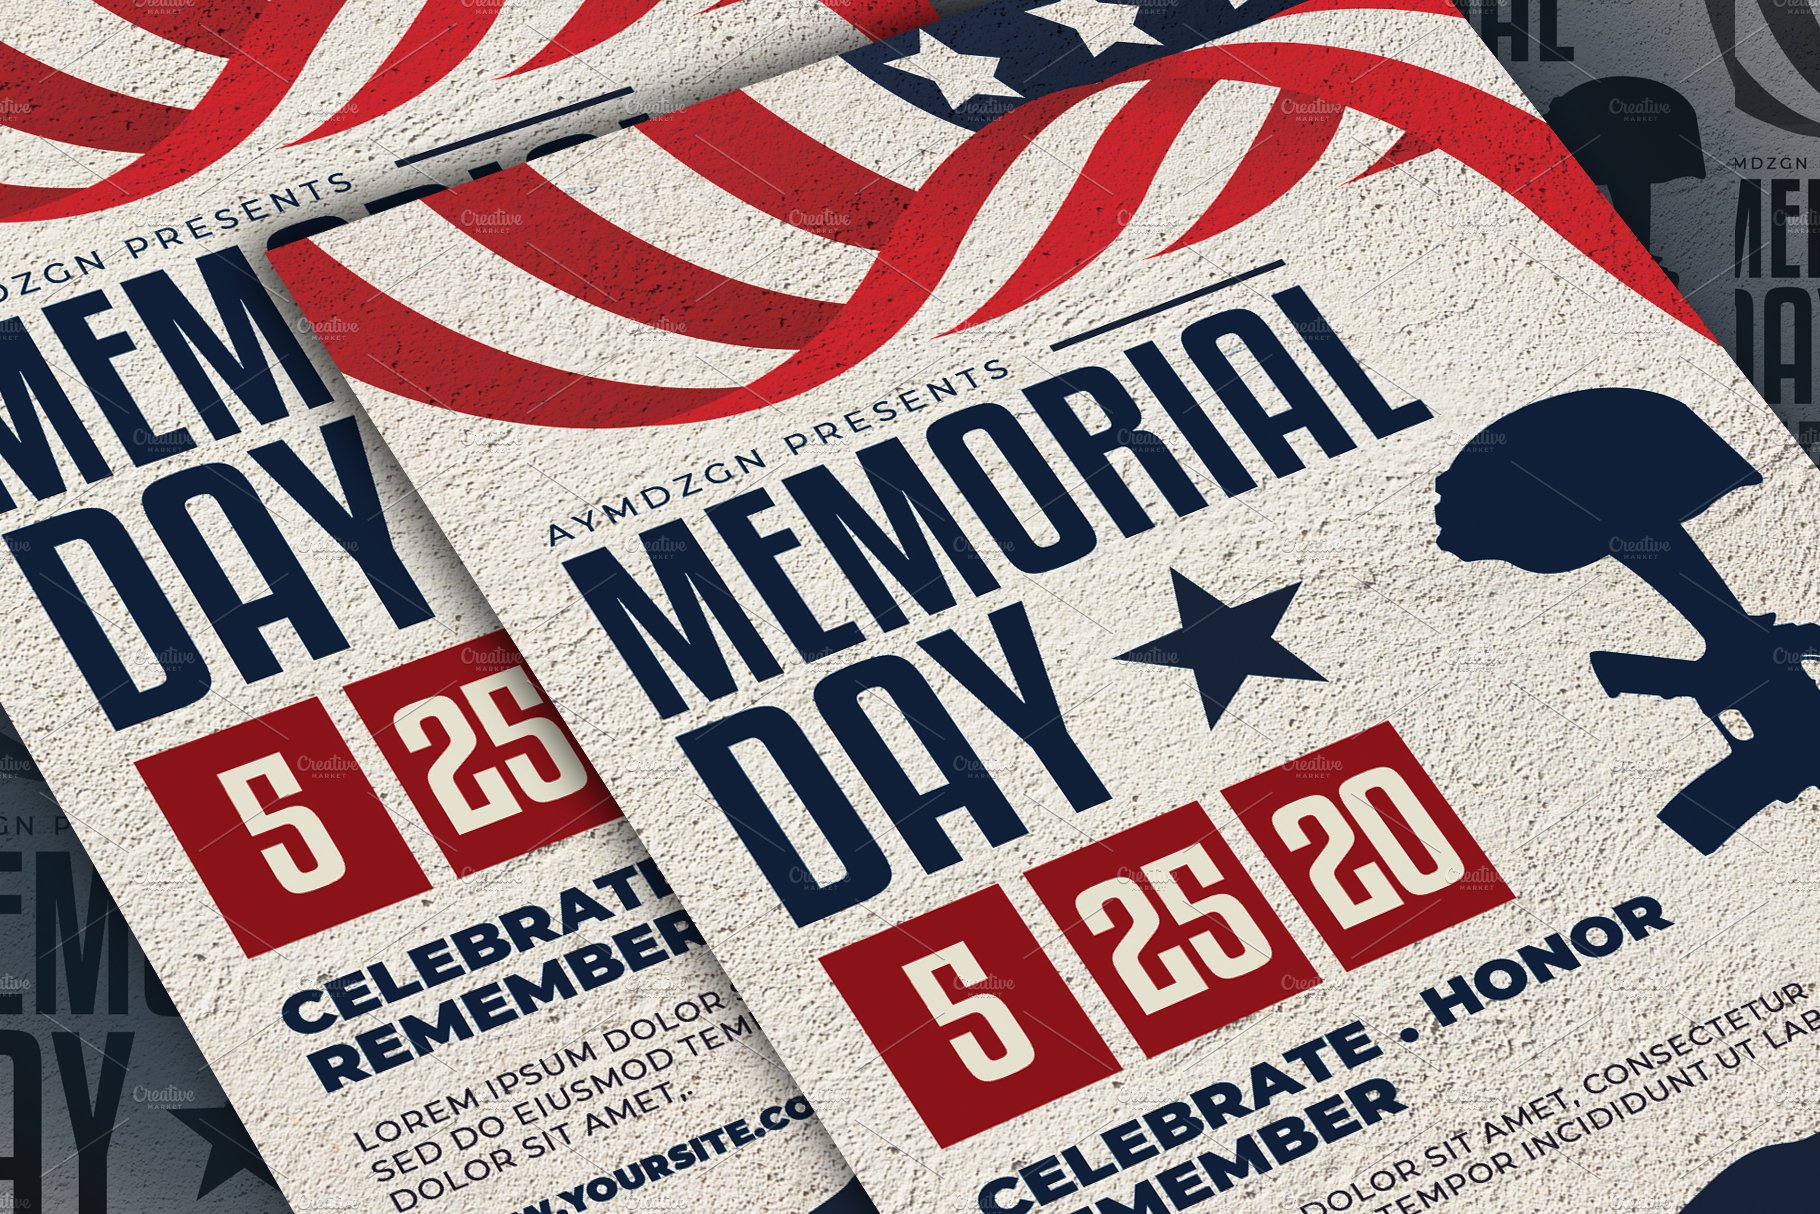 Colorful memorial flyers in a retro style.